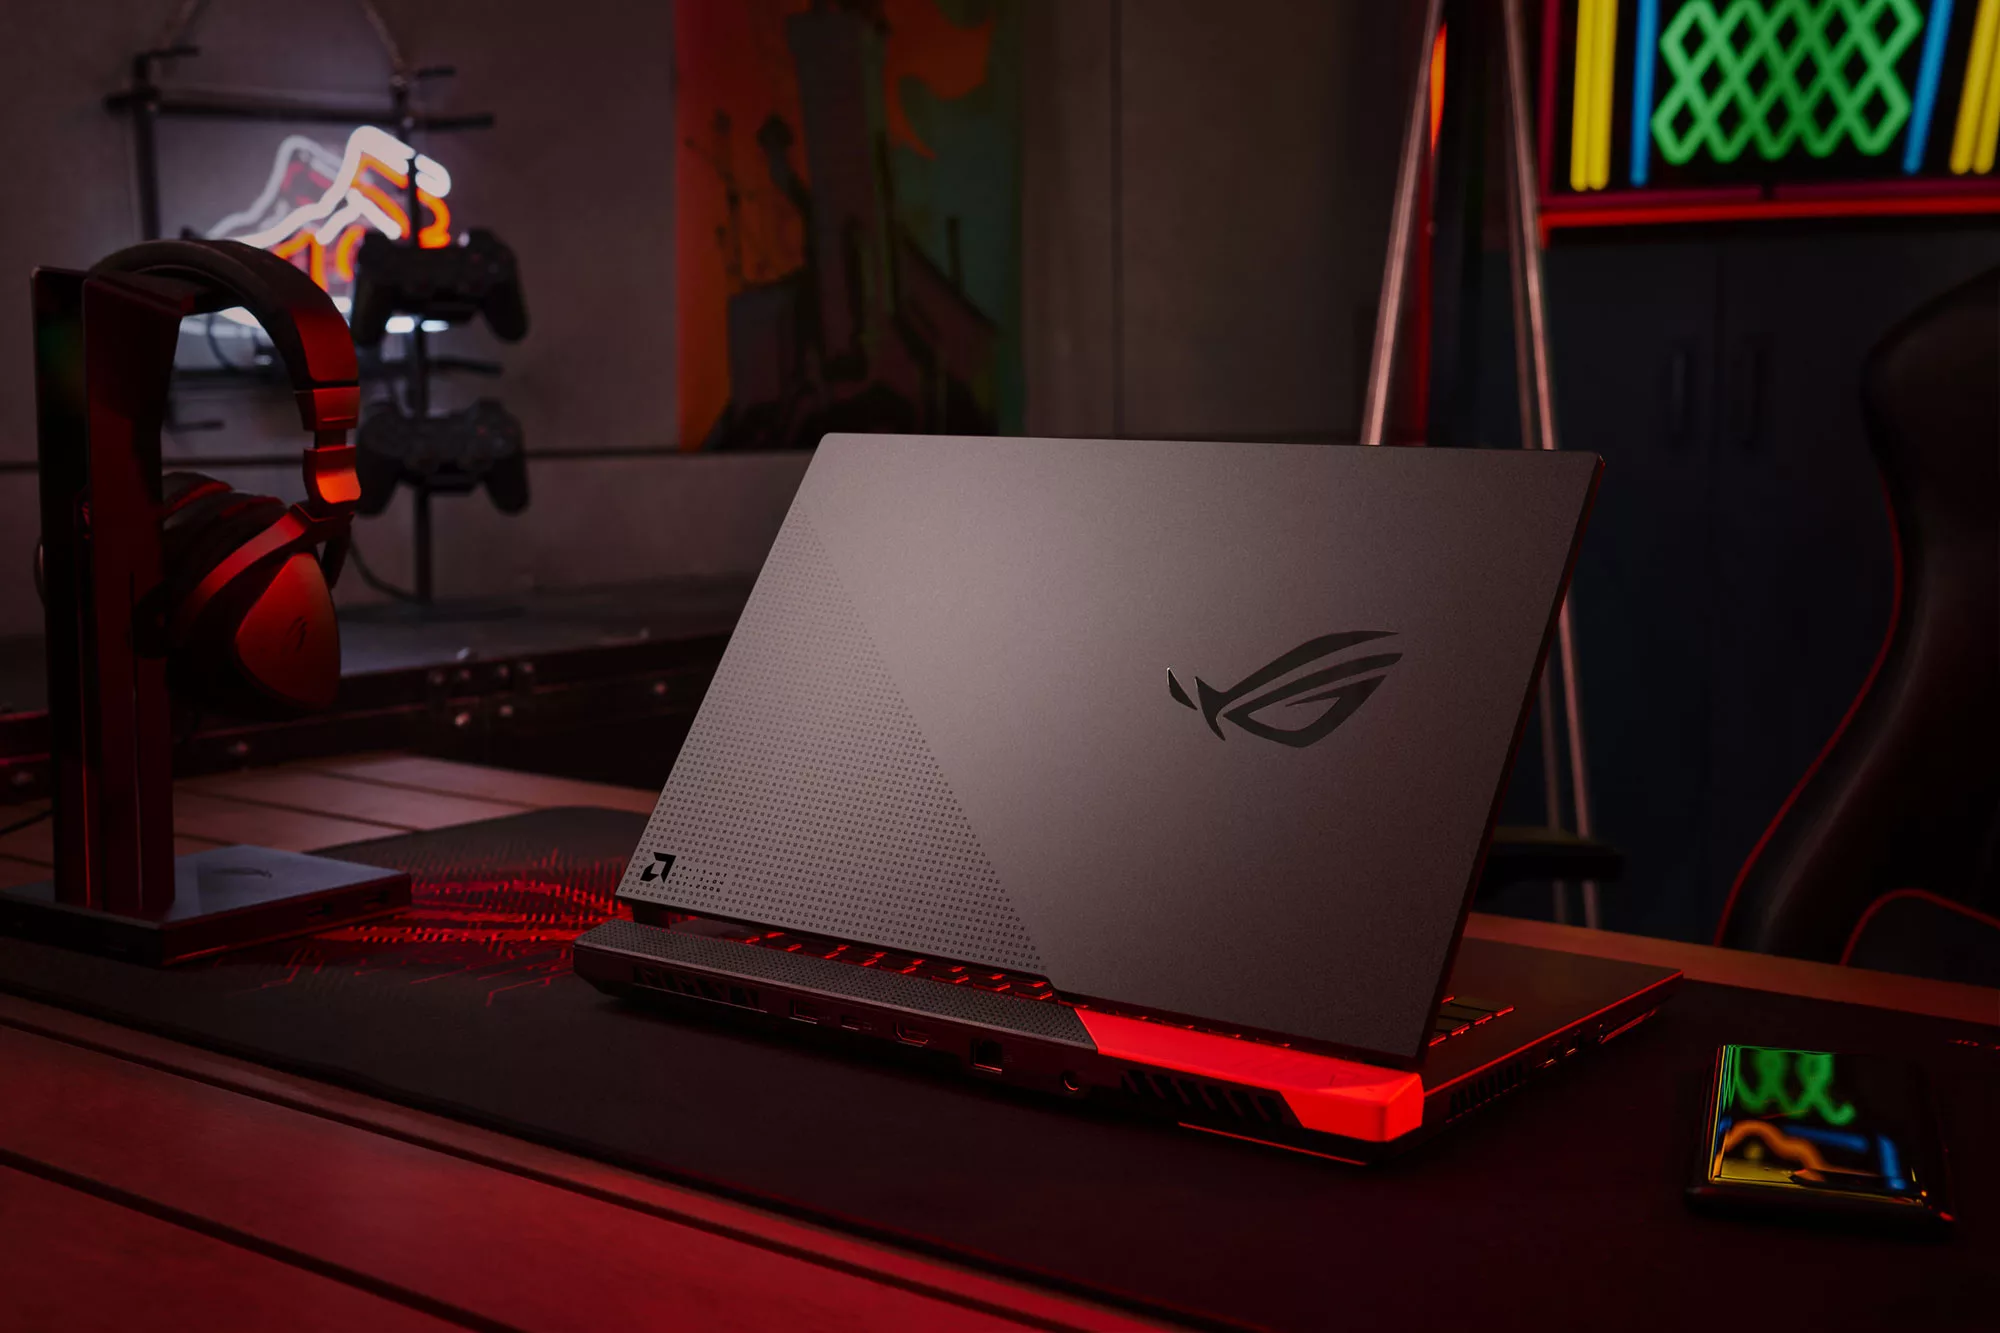 ROG Strix G Advantage Edition, sitting on a table, with the ROG eye logo visible.